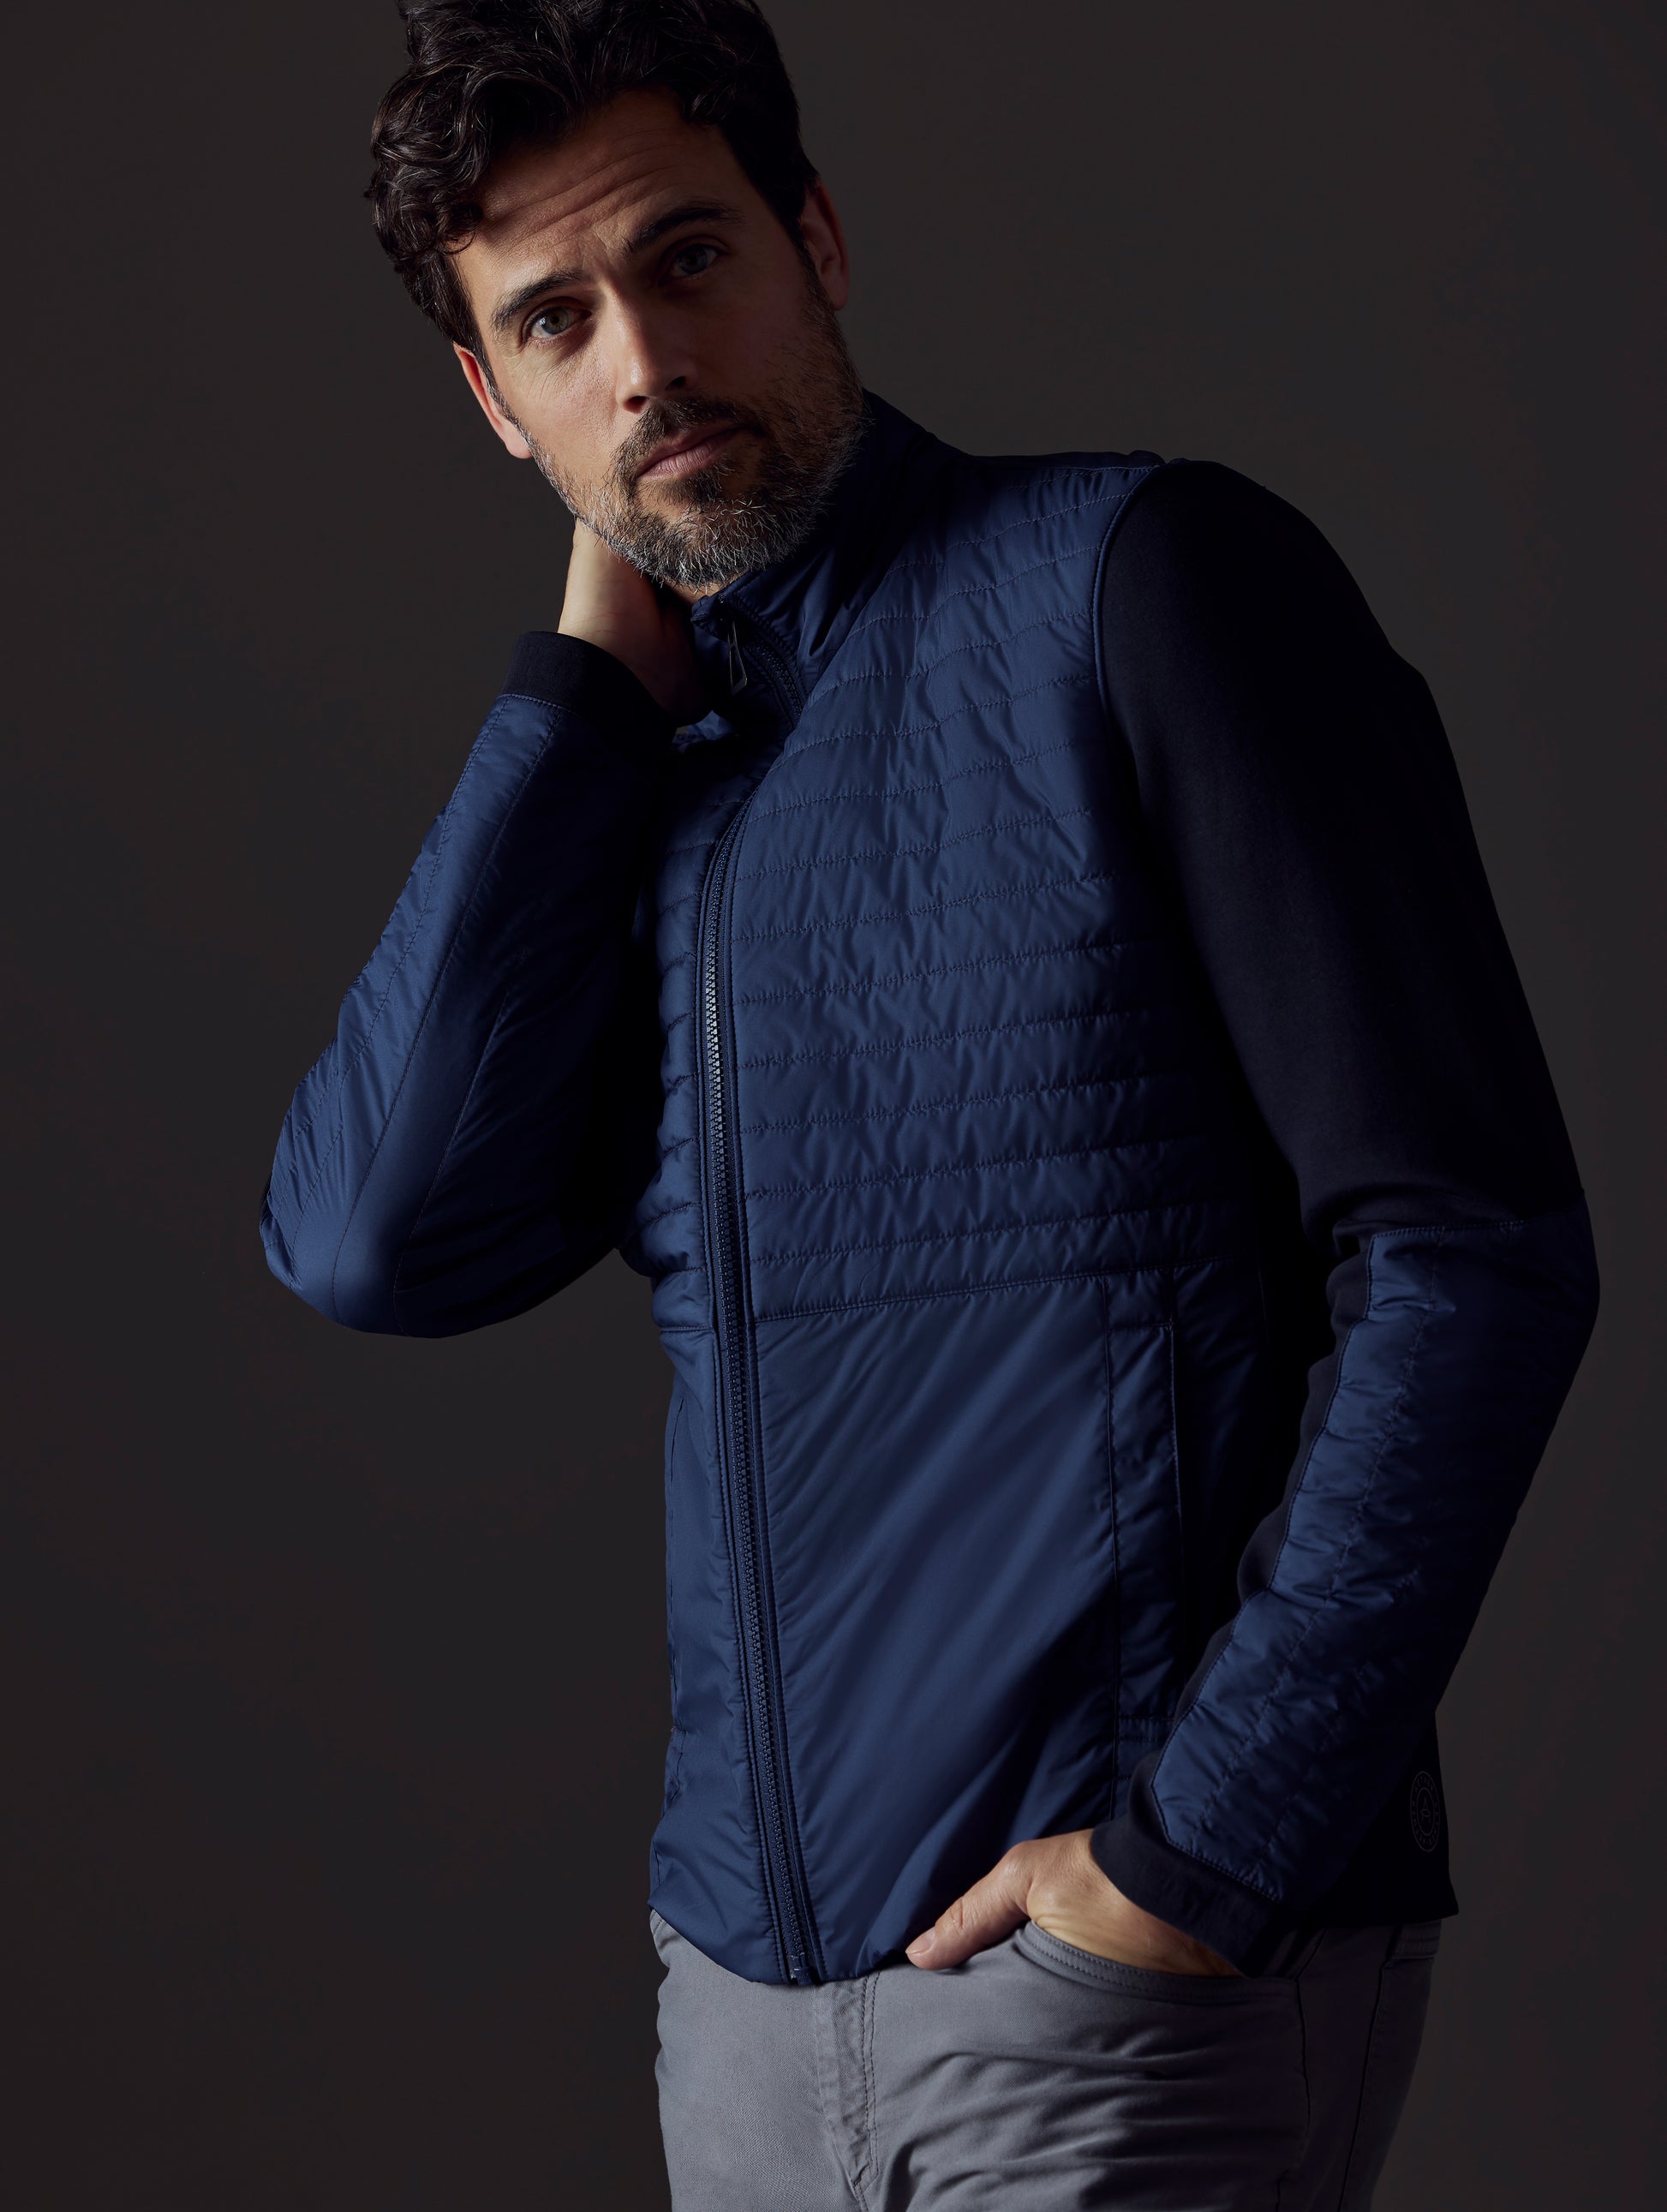 Man wearing blue technical jacket from AETHER Apparel